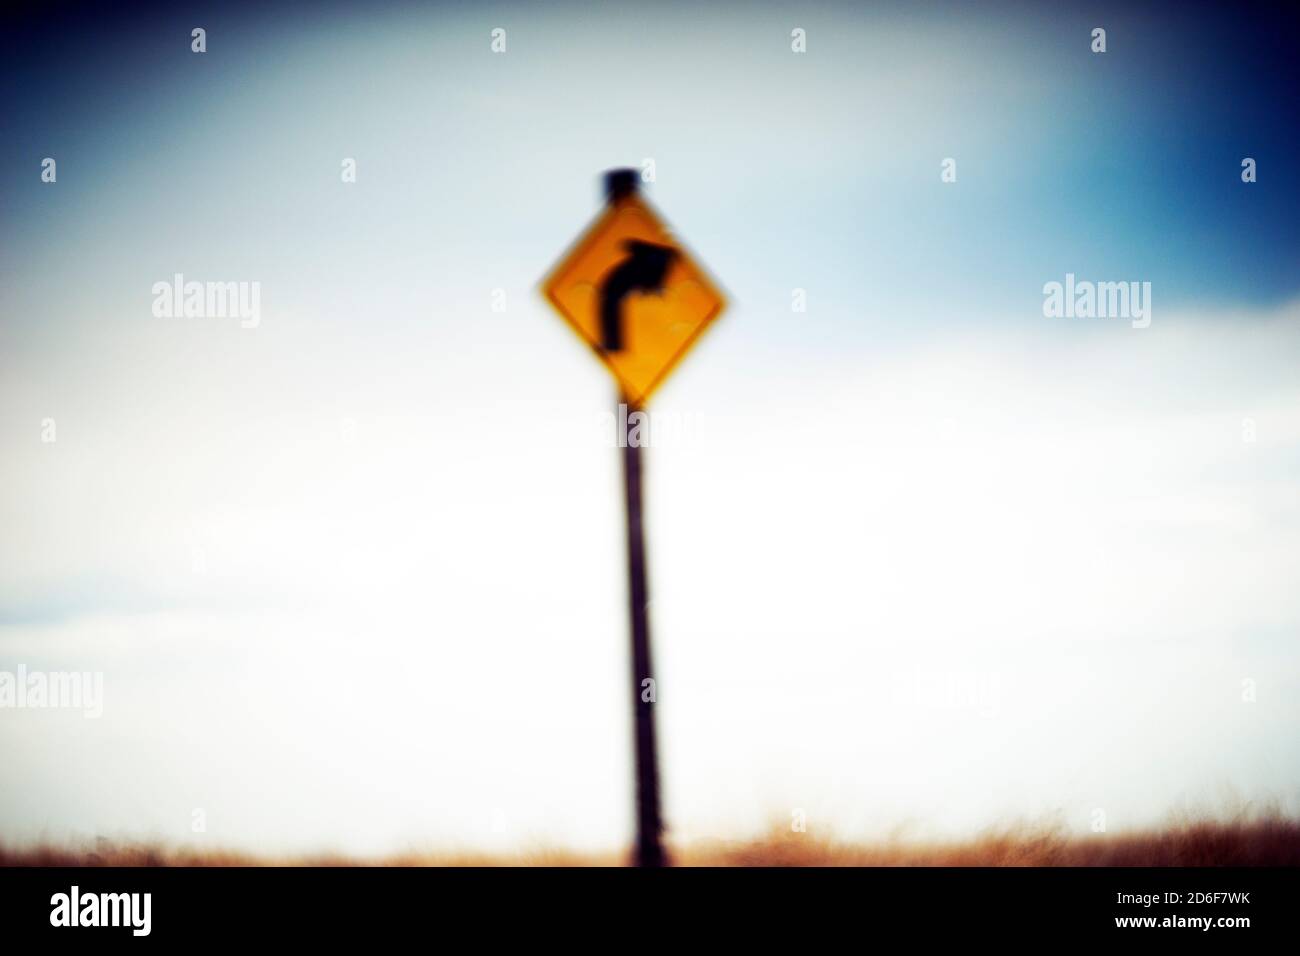 Blurred Directional Road Sign Stock Photo